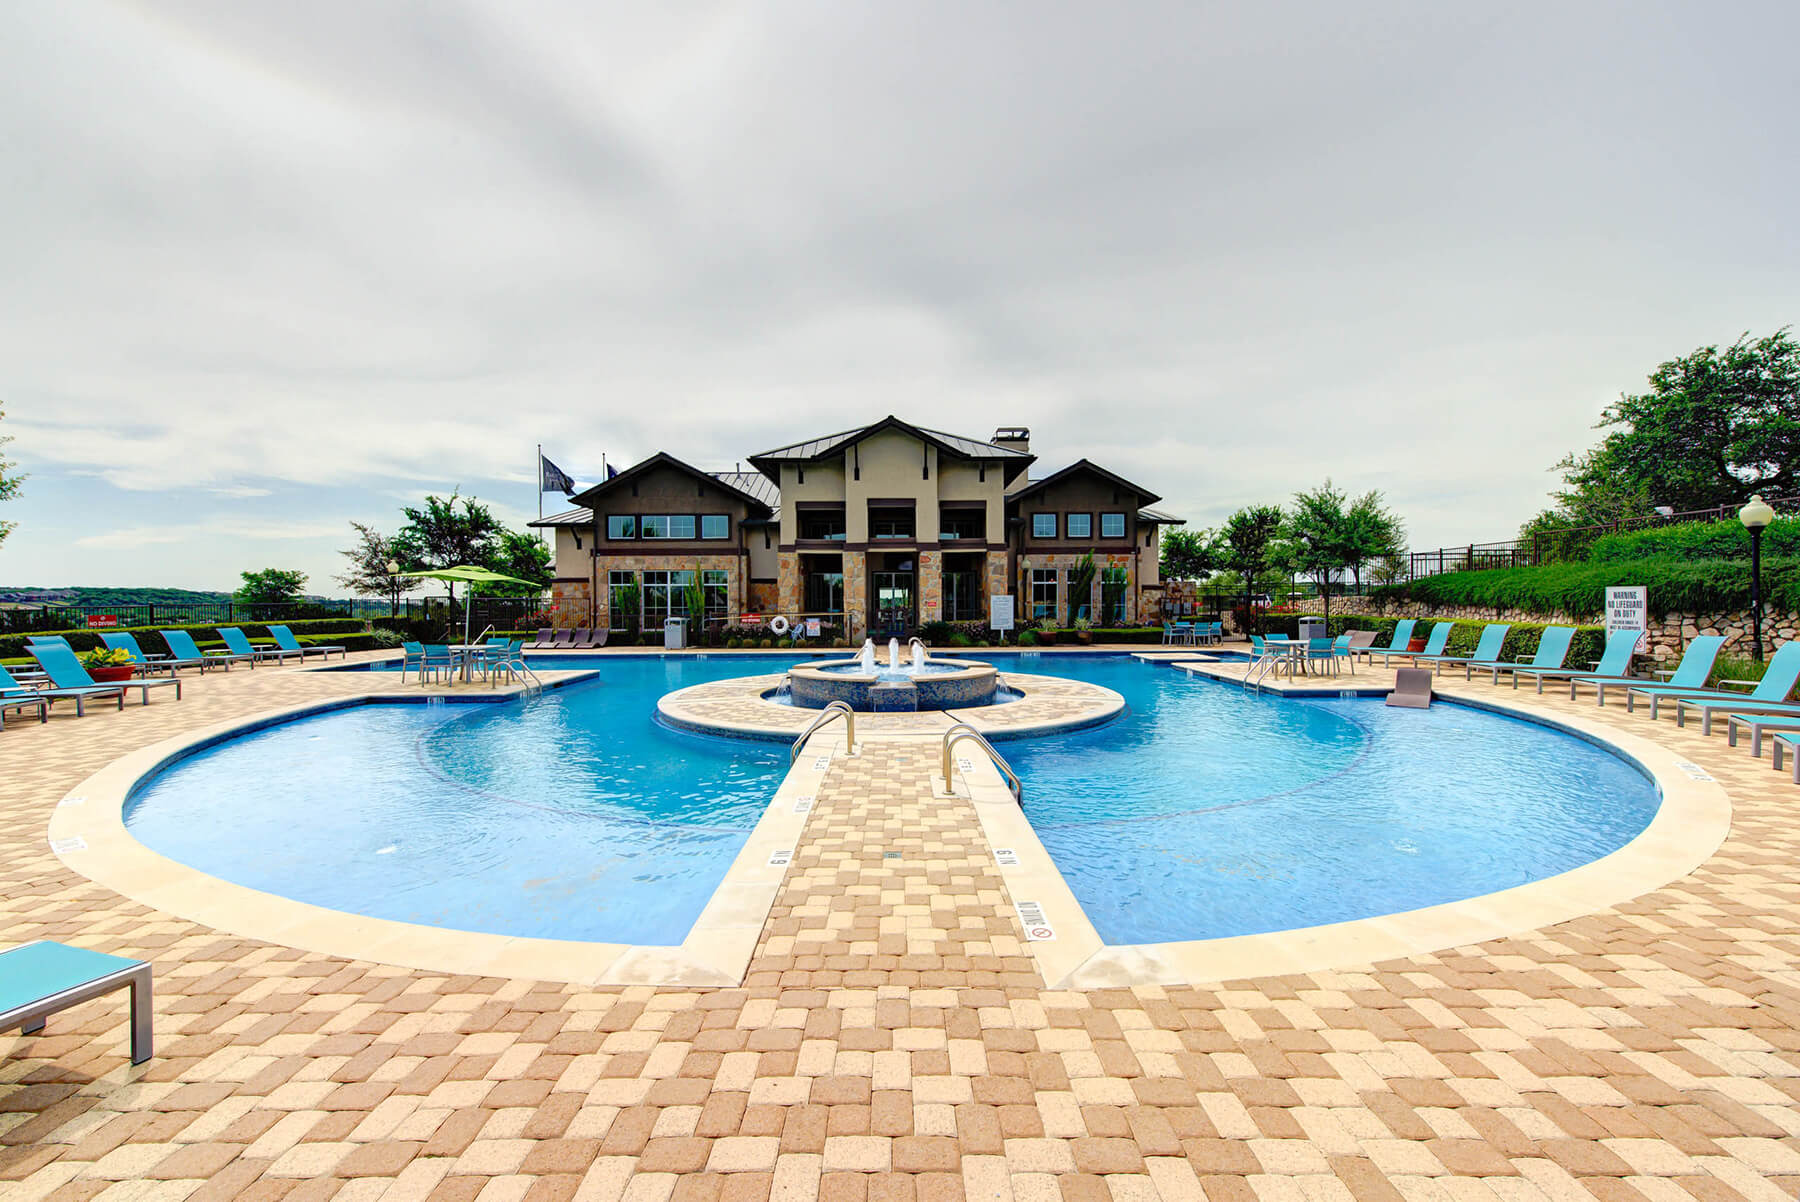 The luxury community pool at the Callista Hill Country Apartments in Austin, Texas.